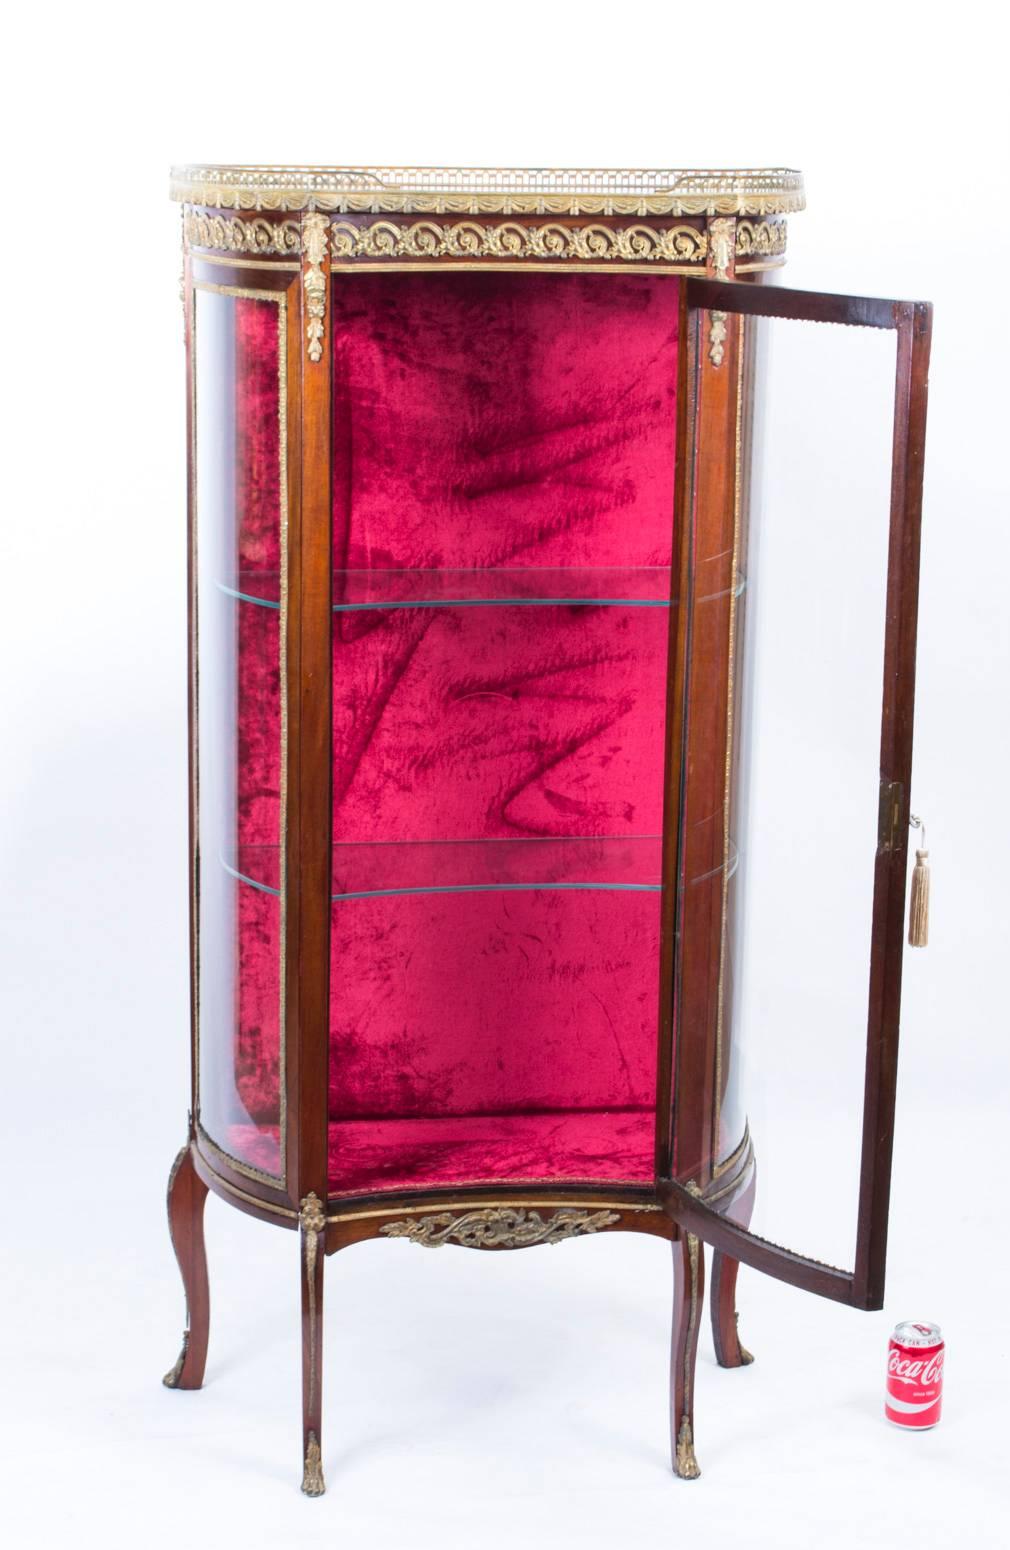 This is a beautiful antique French mahogany and ormolu-mounted display cabinet in the French Louis XV manner, circa 1880 in date.

This beautiful cabinet has an abundance of exquisite ormolu mounts.

It has shaped glass to the front and sides,